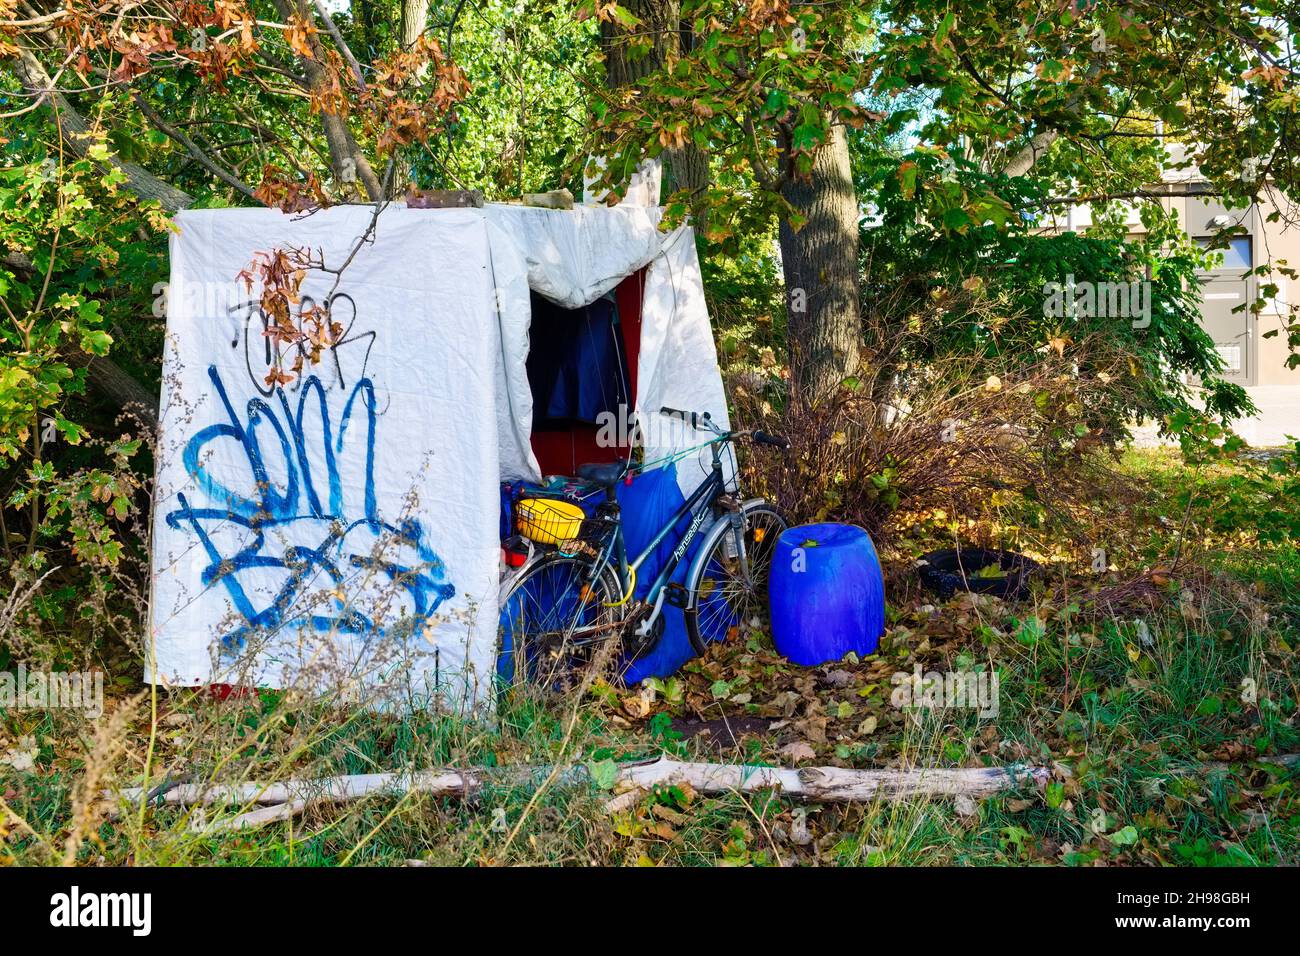 Homeless person shelter, Berlin, Germany Stock Photo